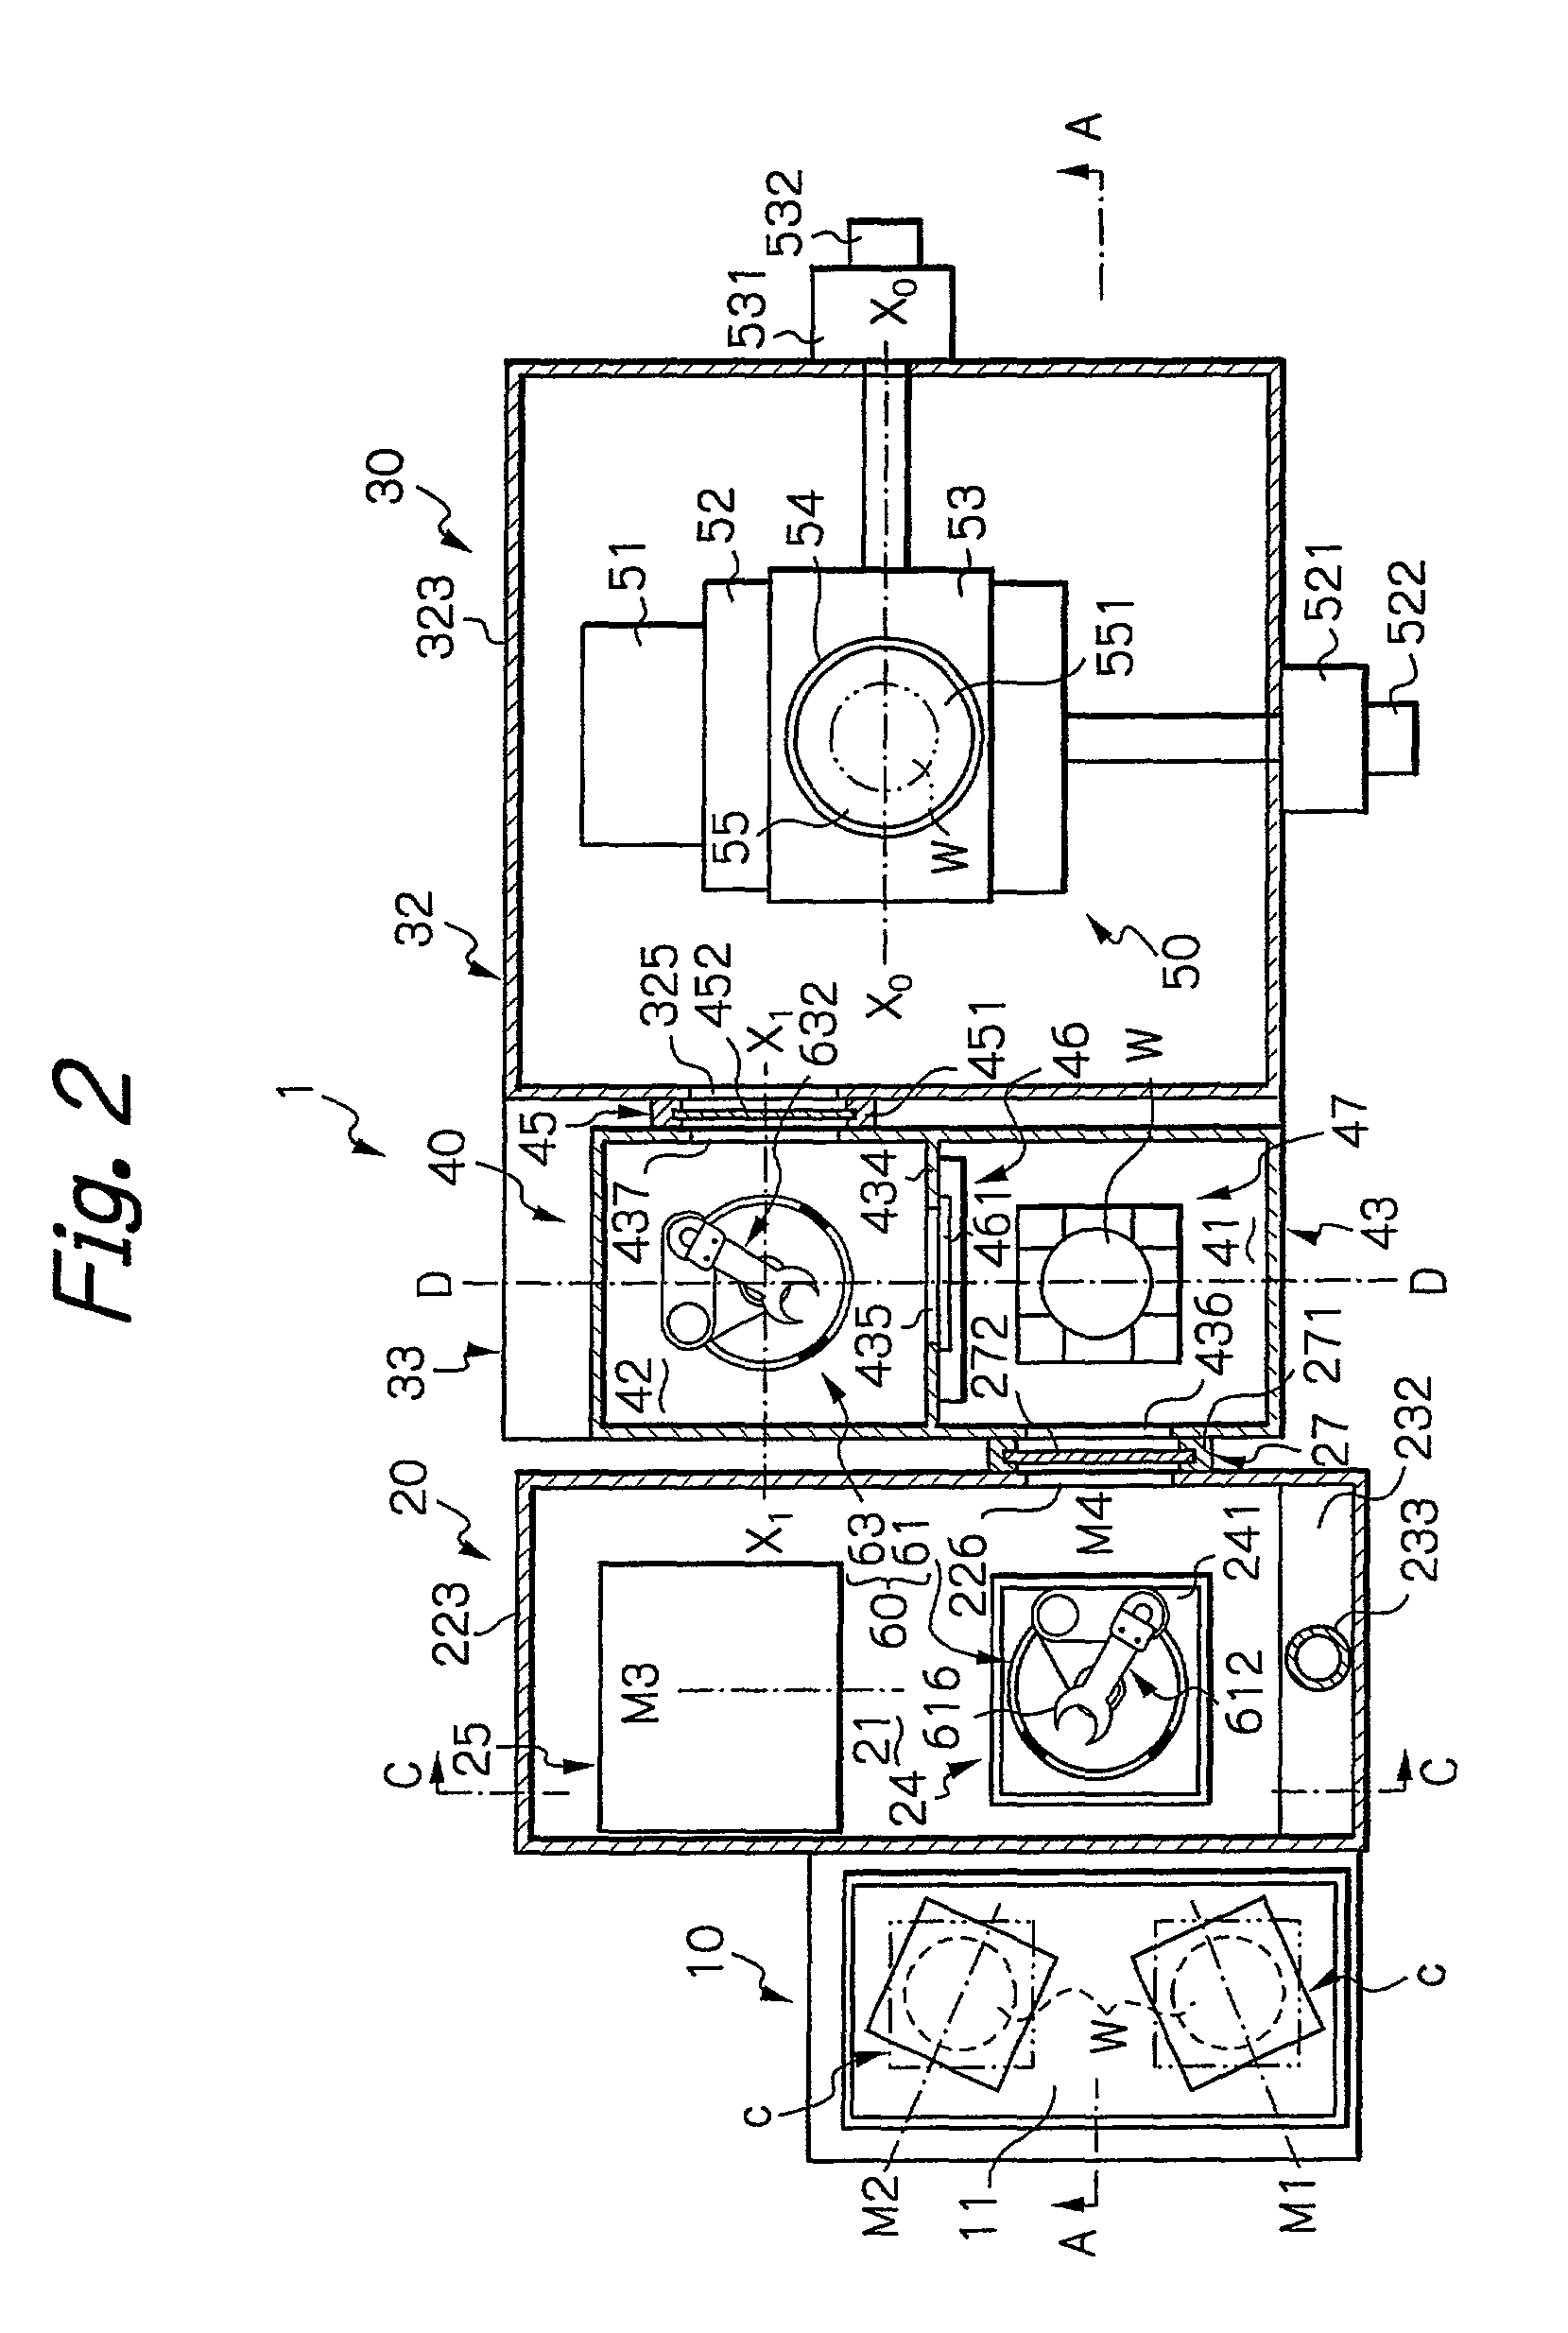 Inspection system by charged particle beam and method of manufacturing devices using the system